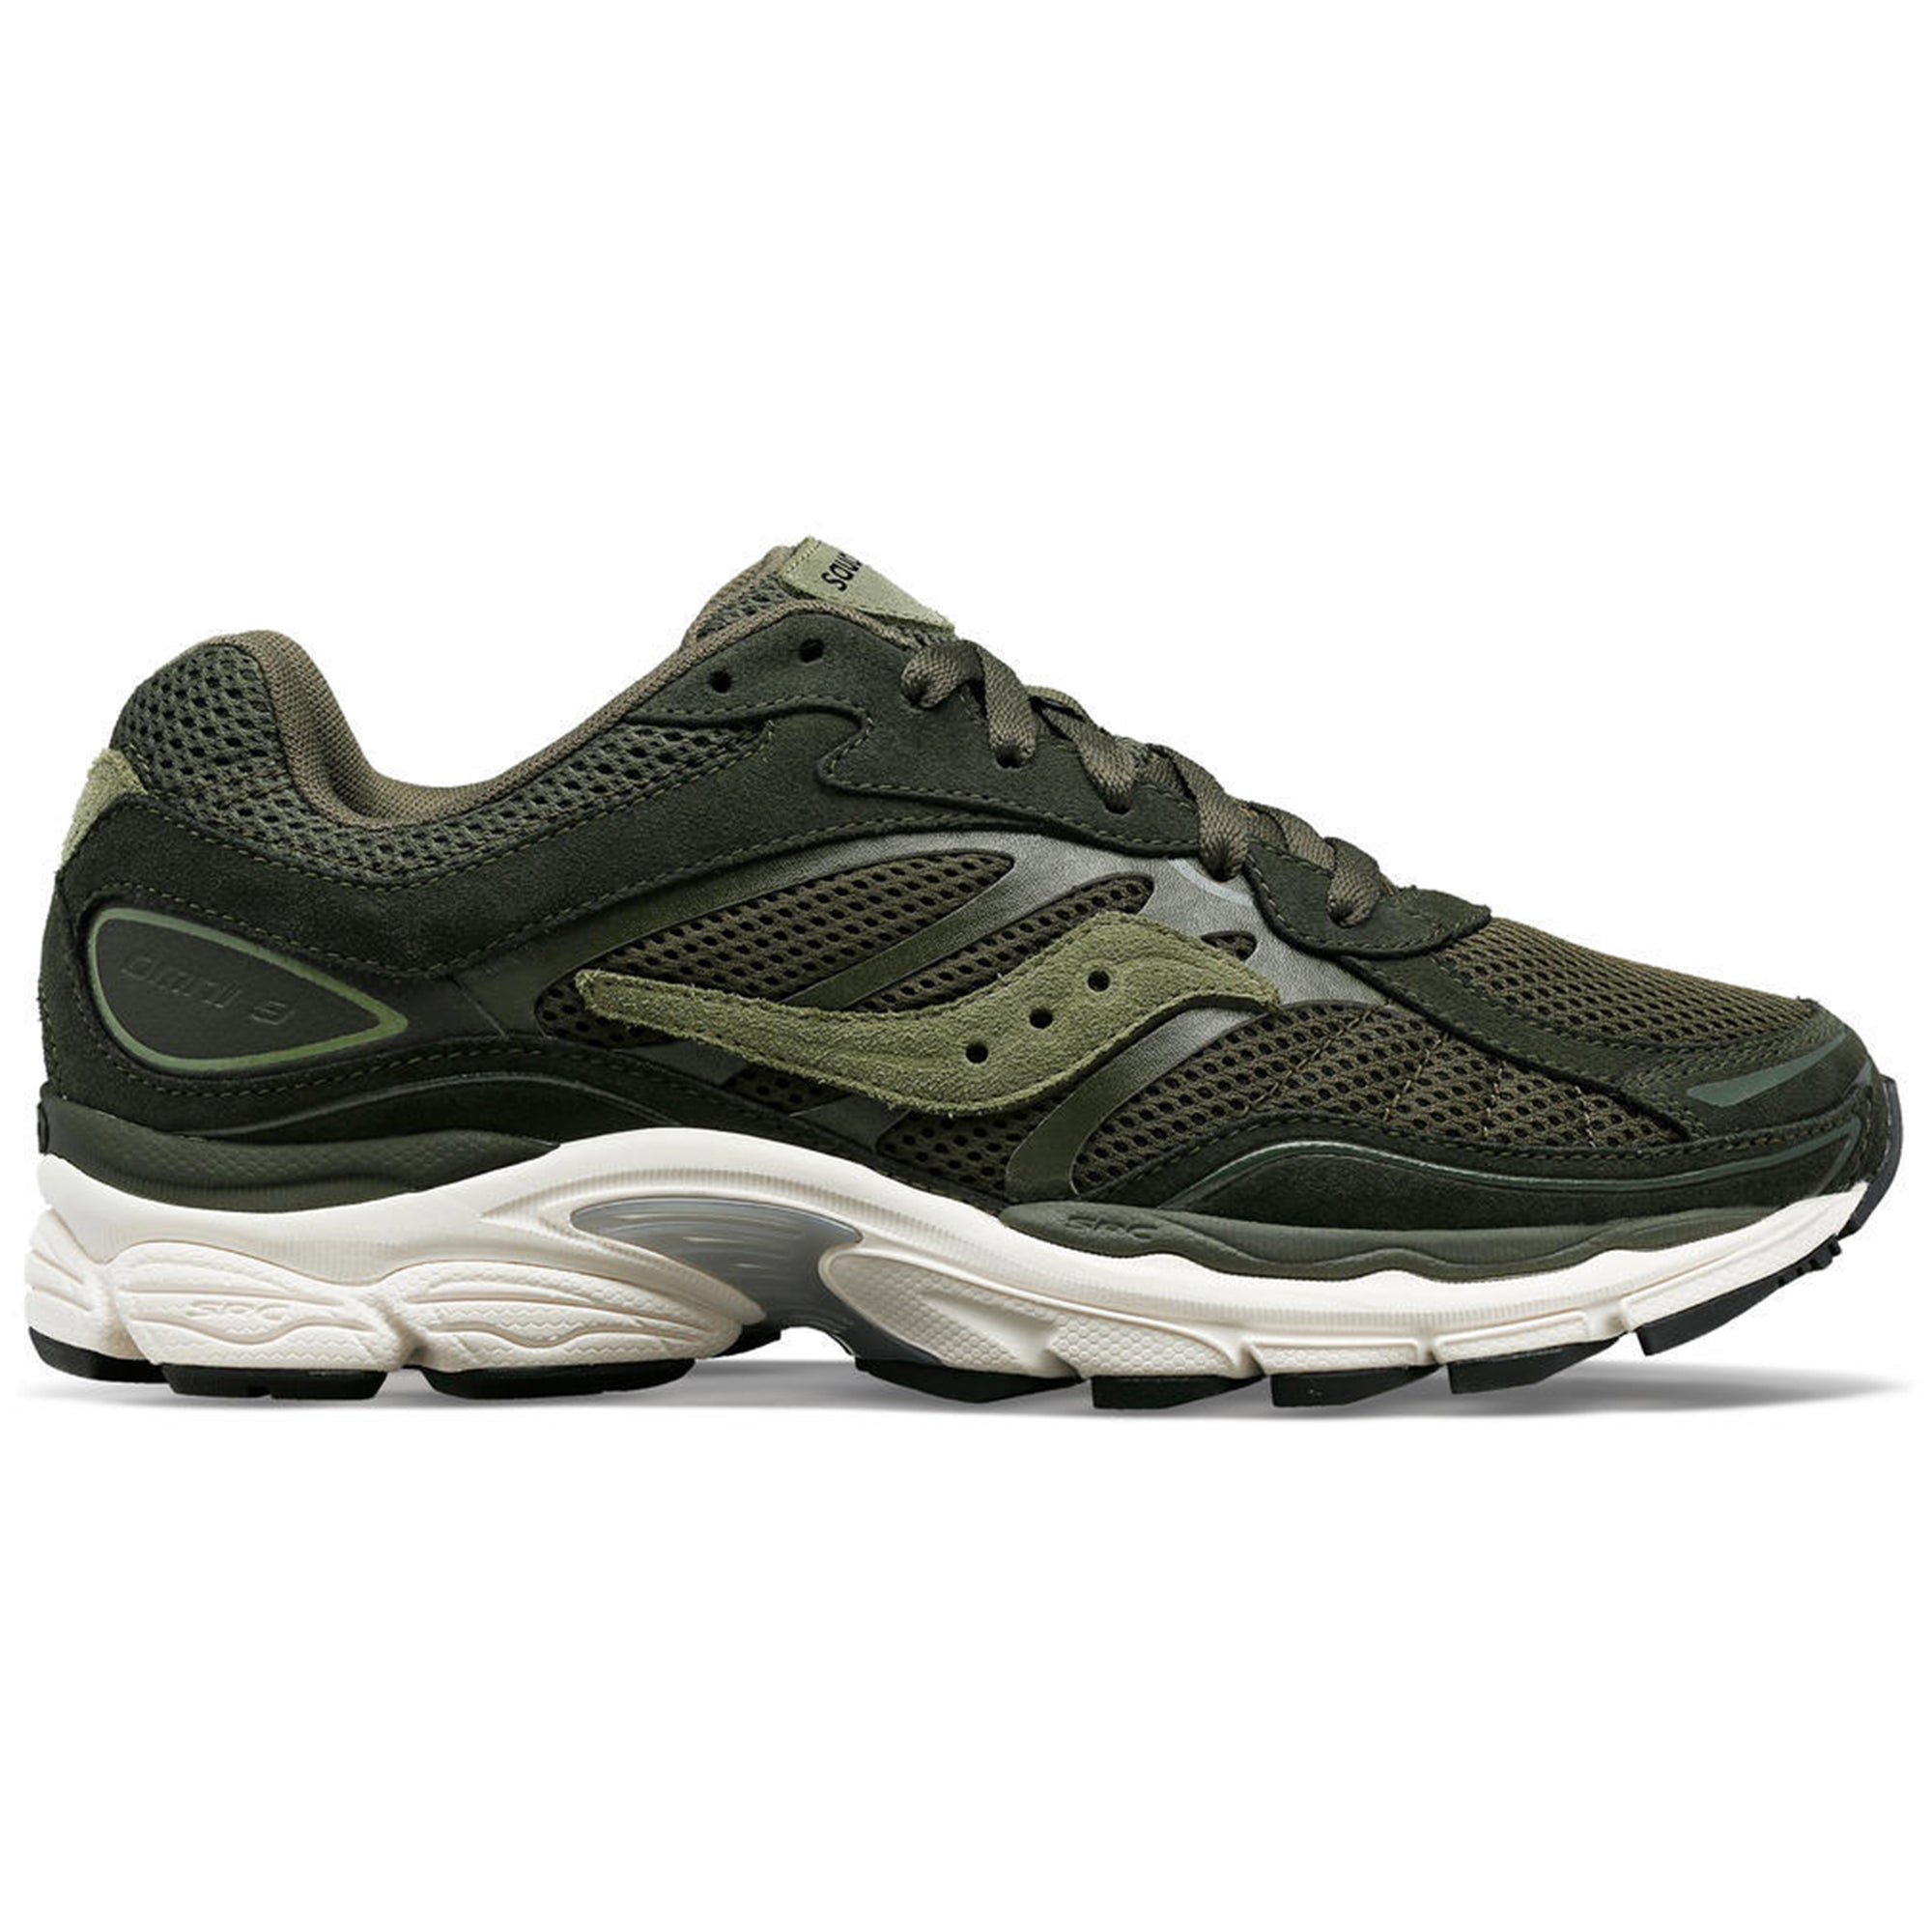 Saucony Pro Grid Omni 9 Trainers - Green